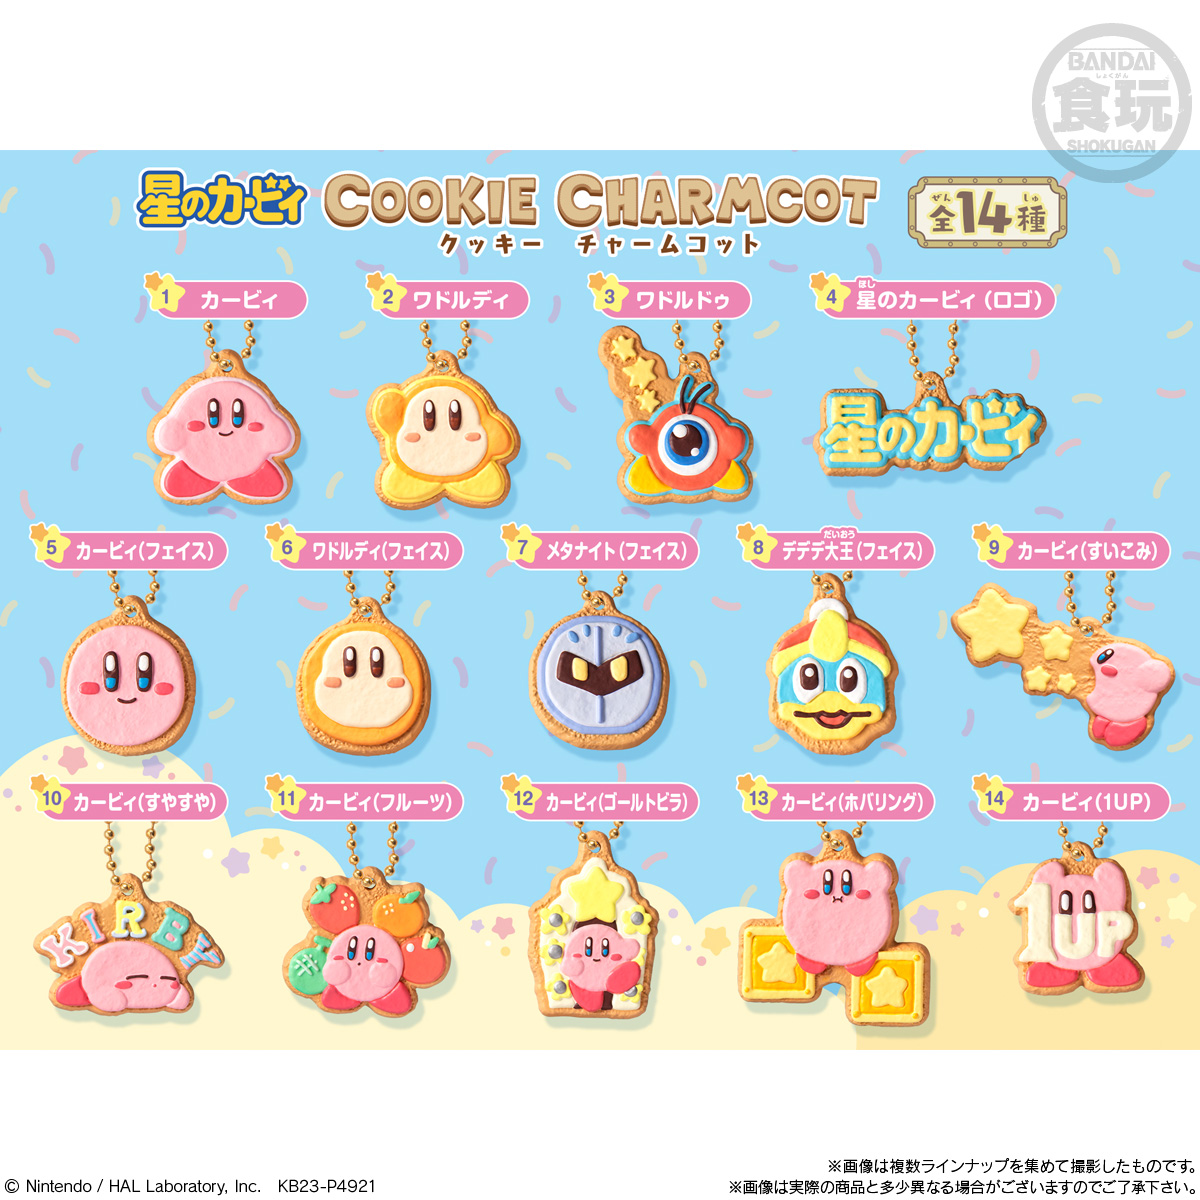 Kirby - Kirby and Friends Cookie Charmcot Blind Keychain image count 1